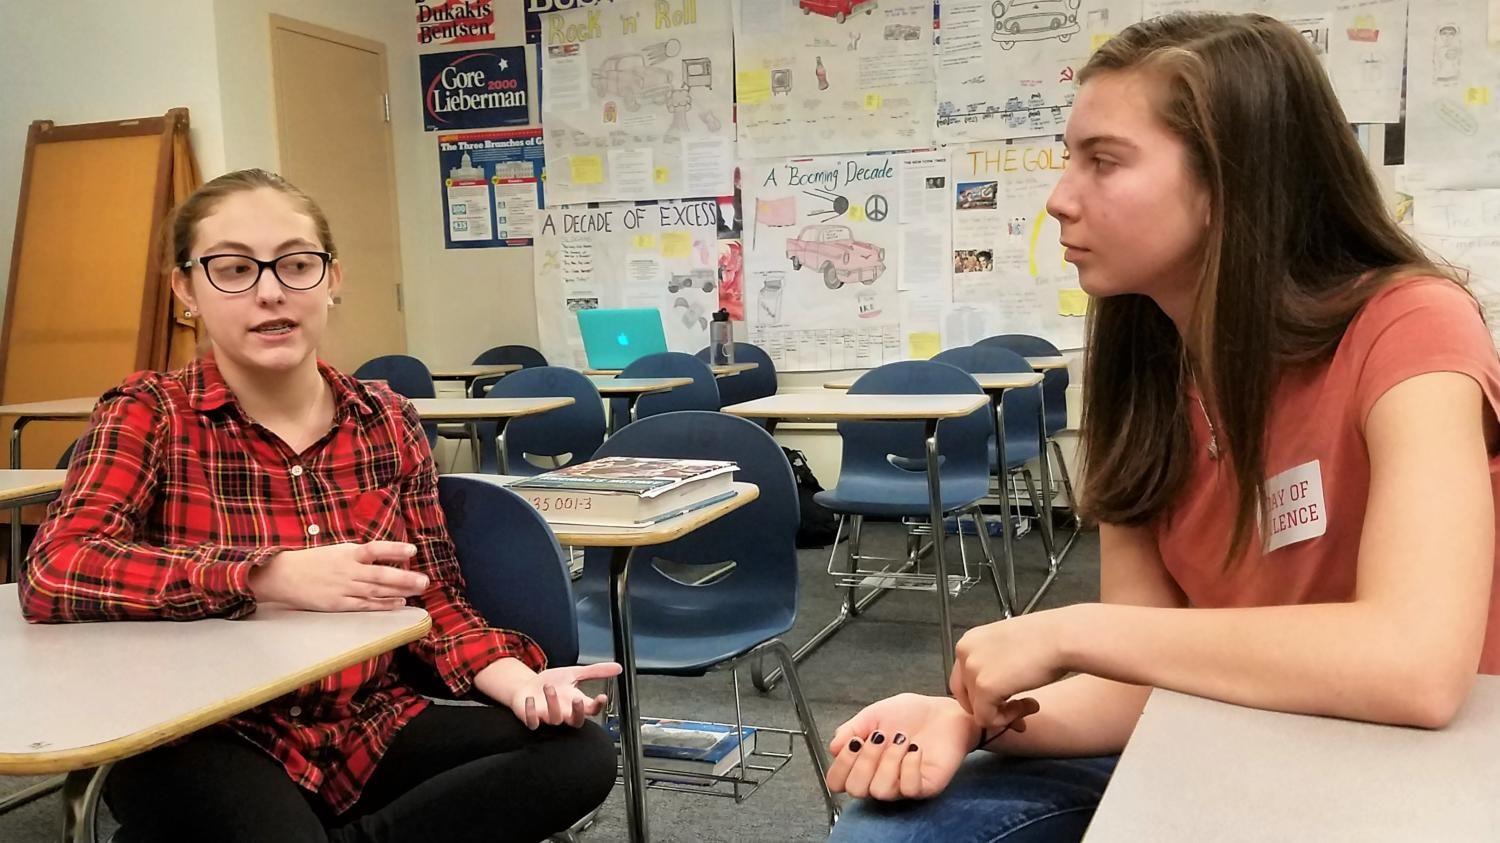 Sarah Selman and Isabel Harnett discuss the future of the Democrats Club. Their meetings take place in room E6 when called upon.